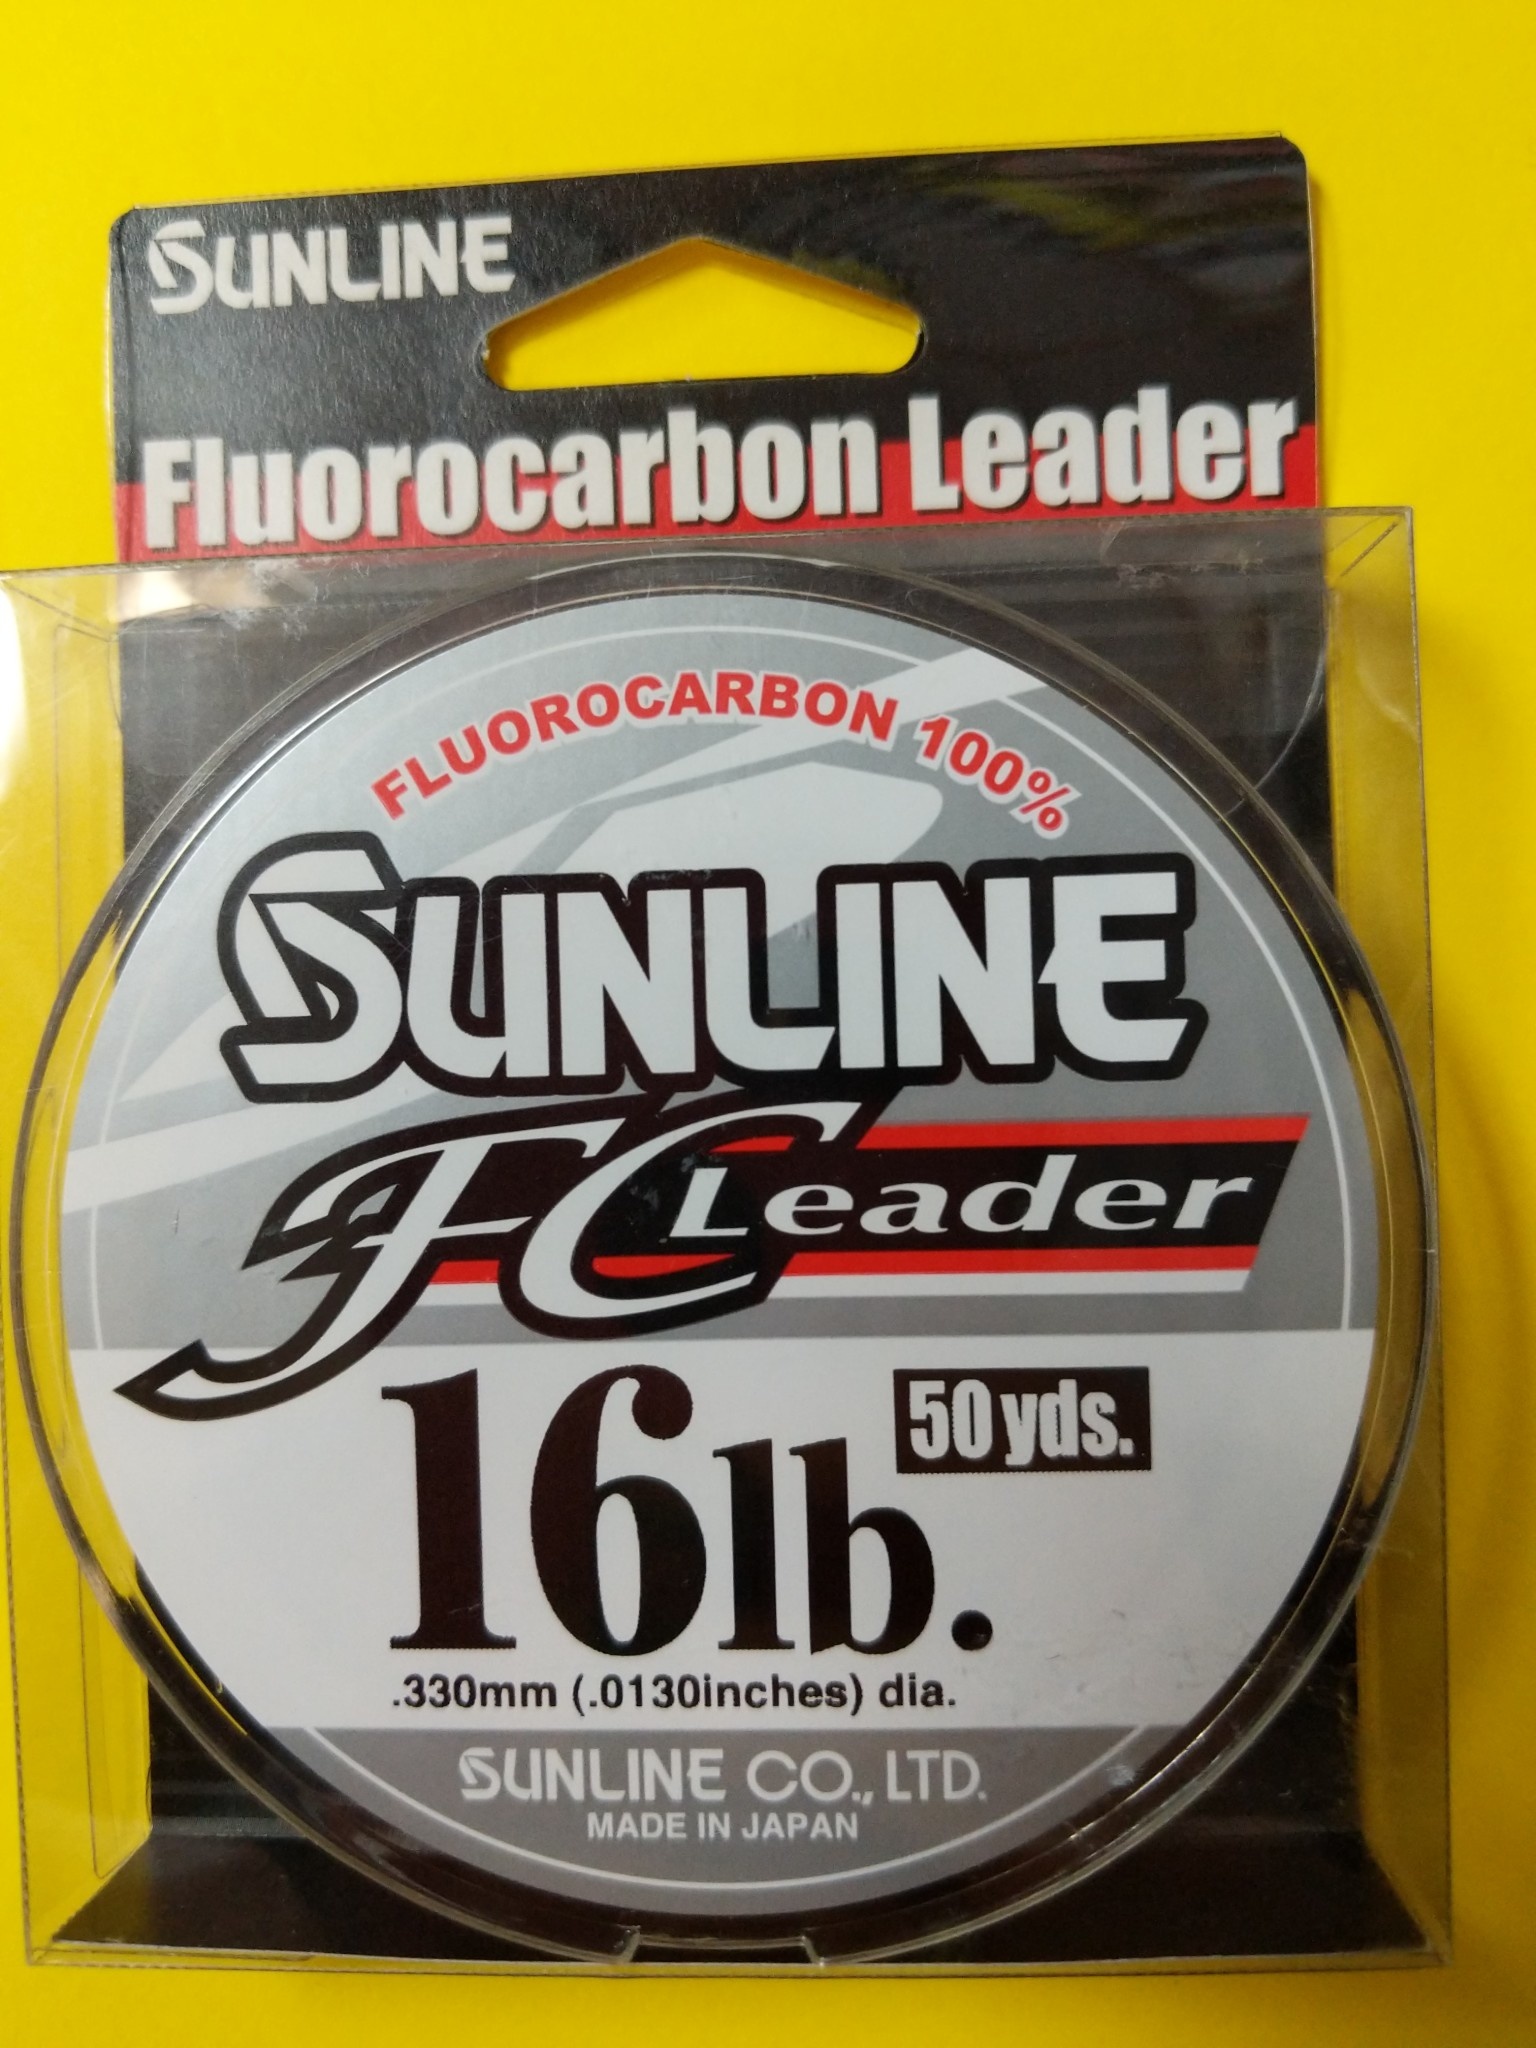 FC leader clear 50yd 16lb - OutfitterSSM